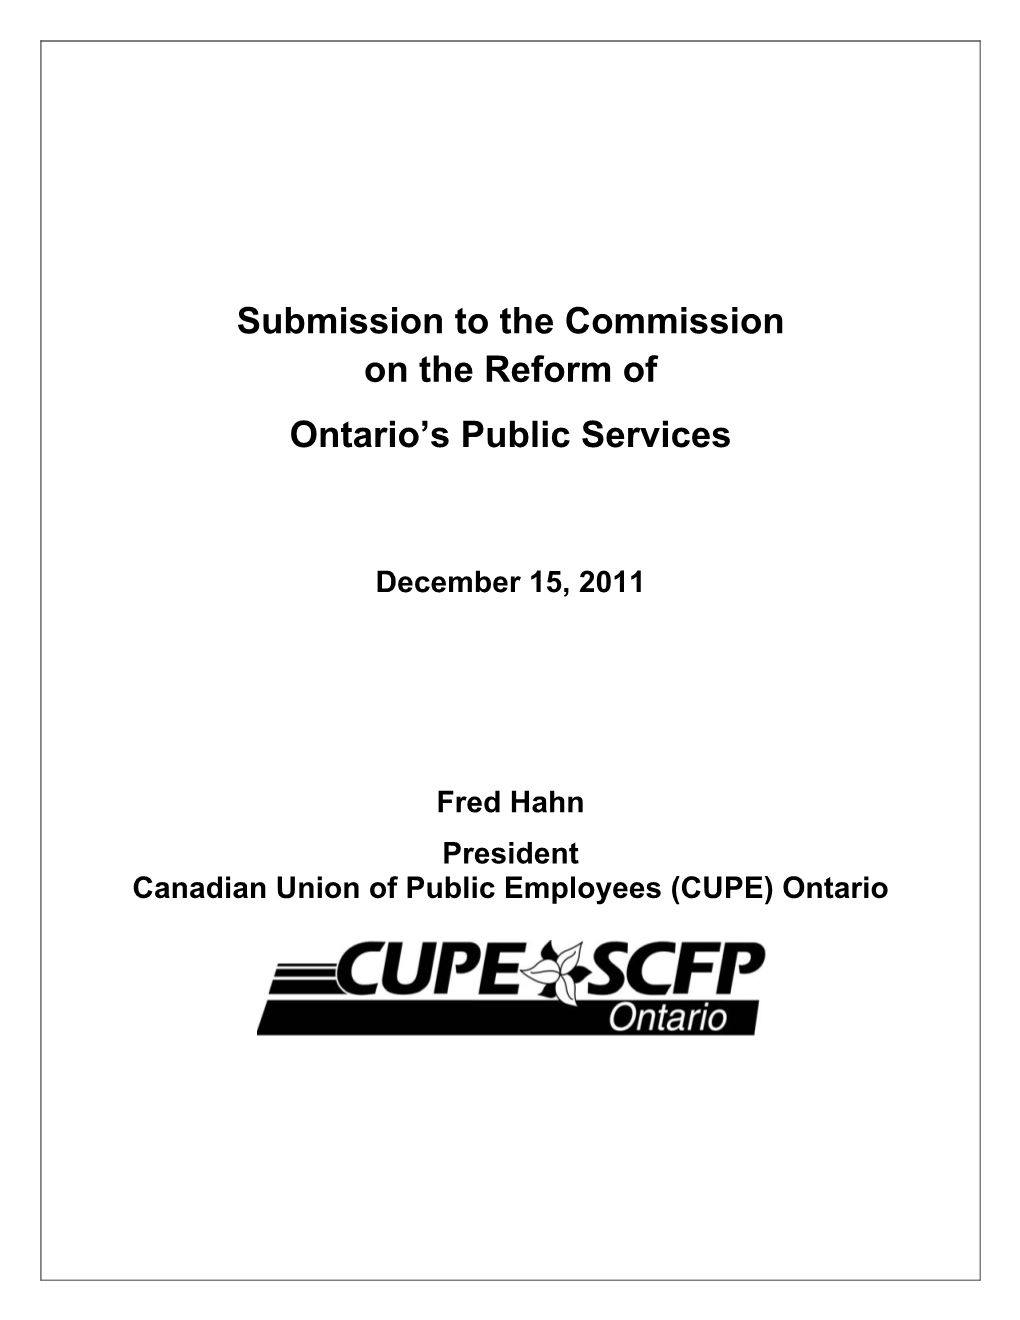 Submission to the Commission on the Reform of Ontario's Public Services